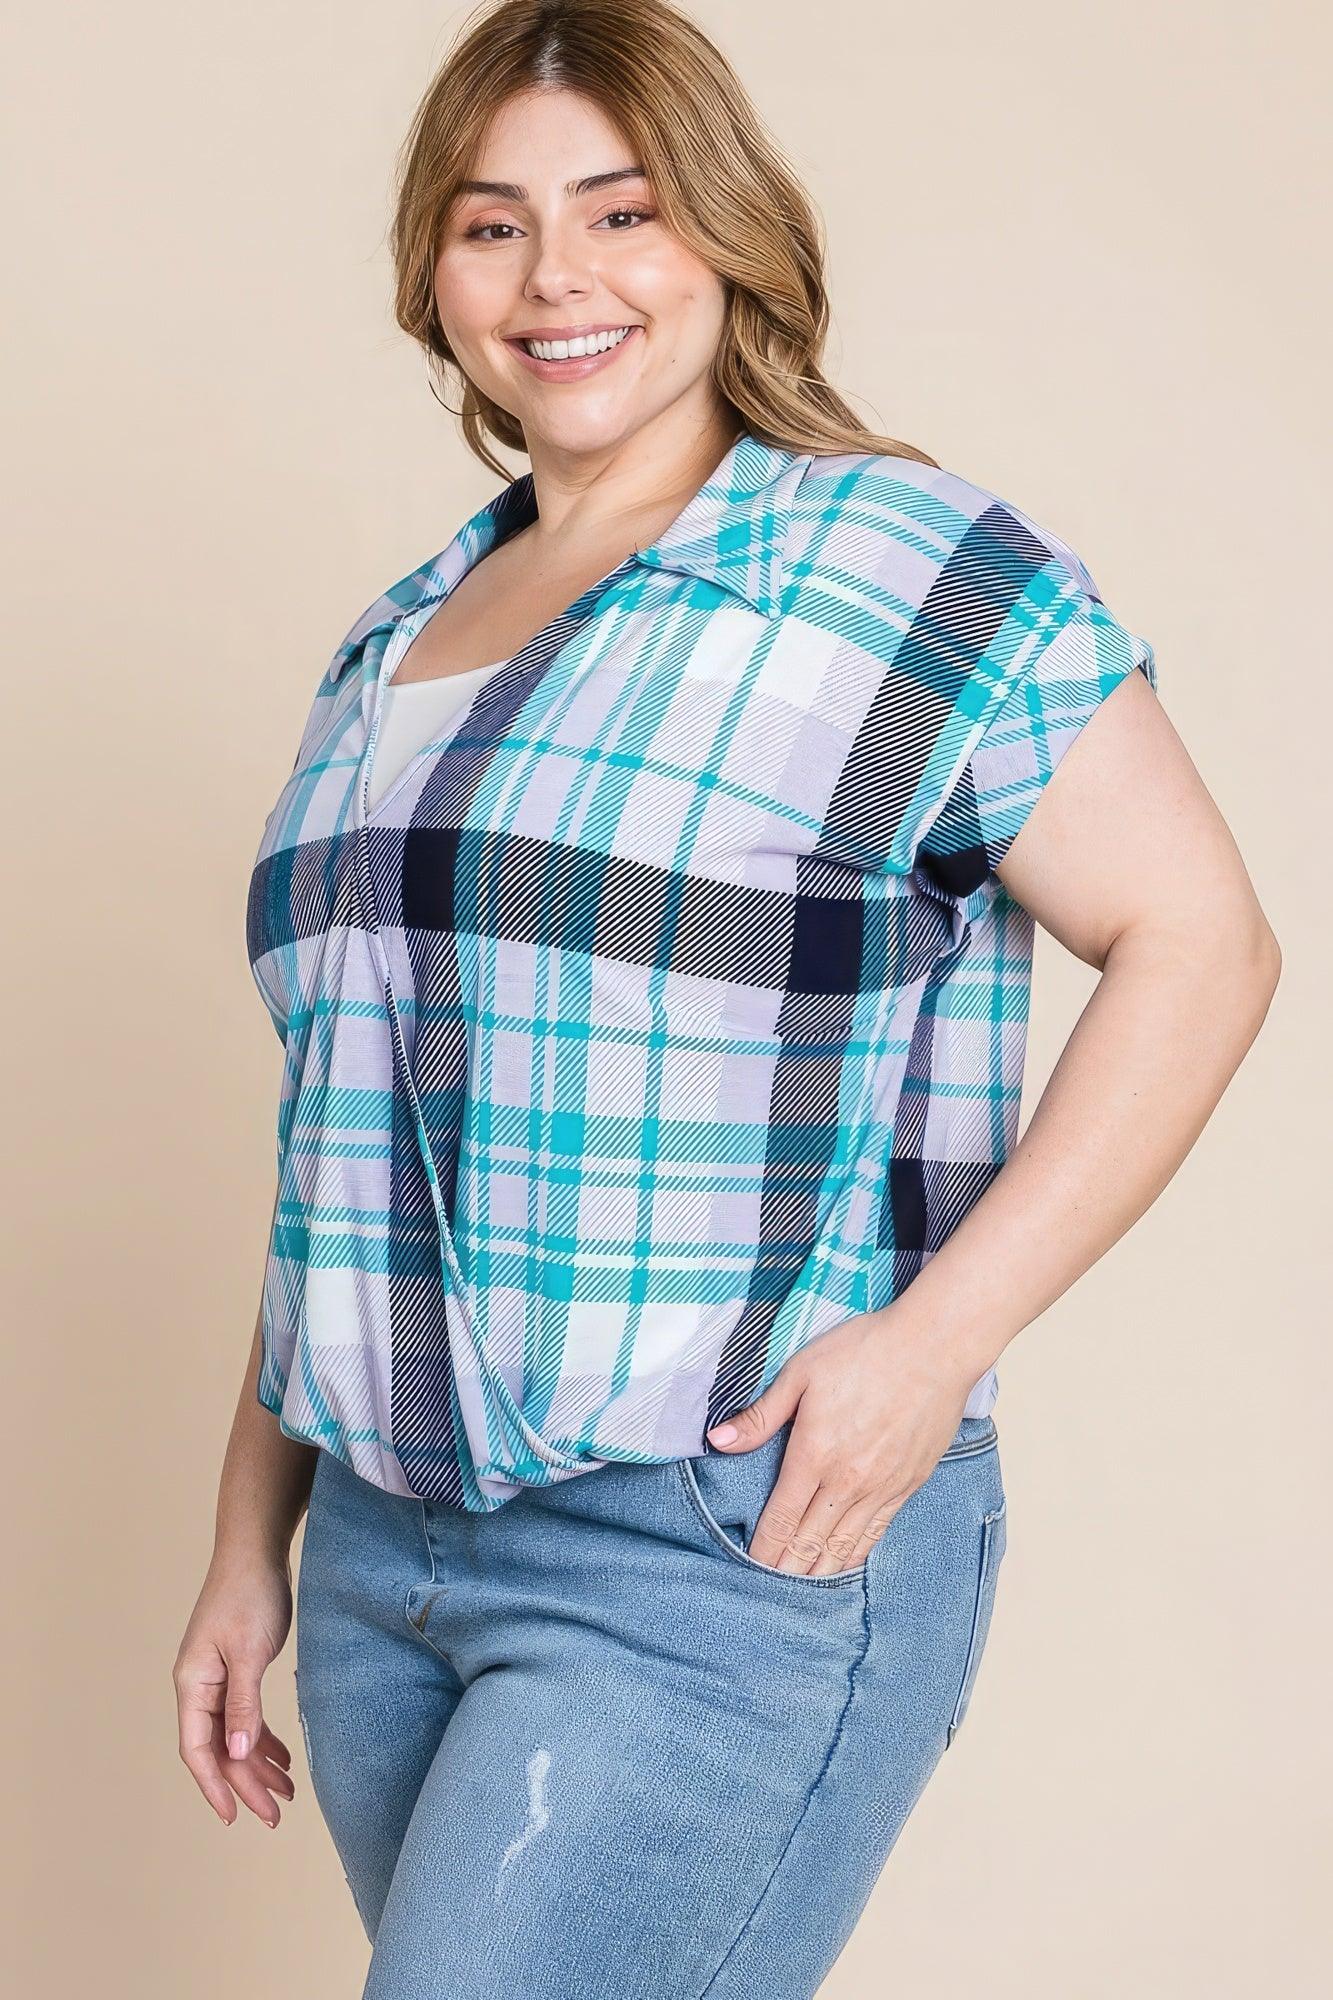 Women's Shirts Plus Size Multi Colored Check Printed Casual Collared Short Sleeve Top